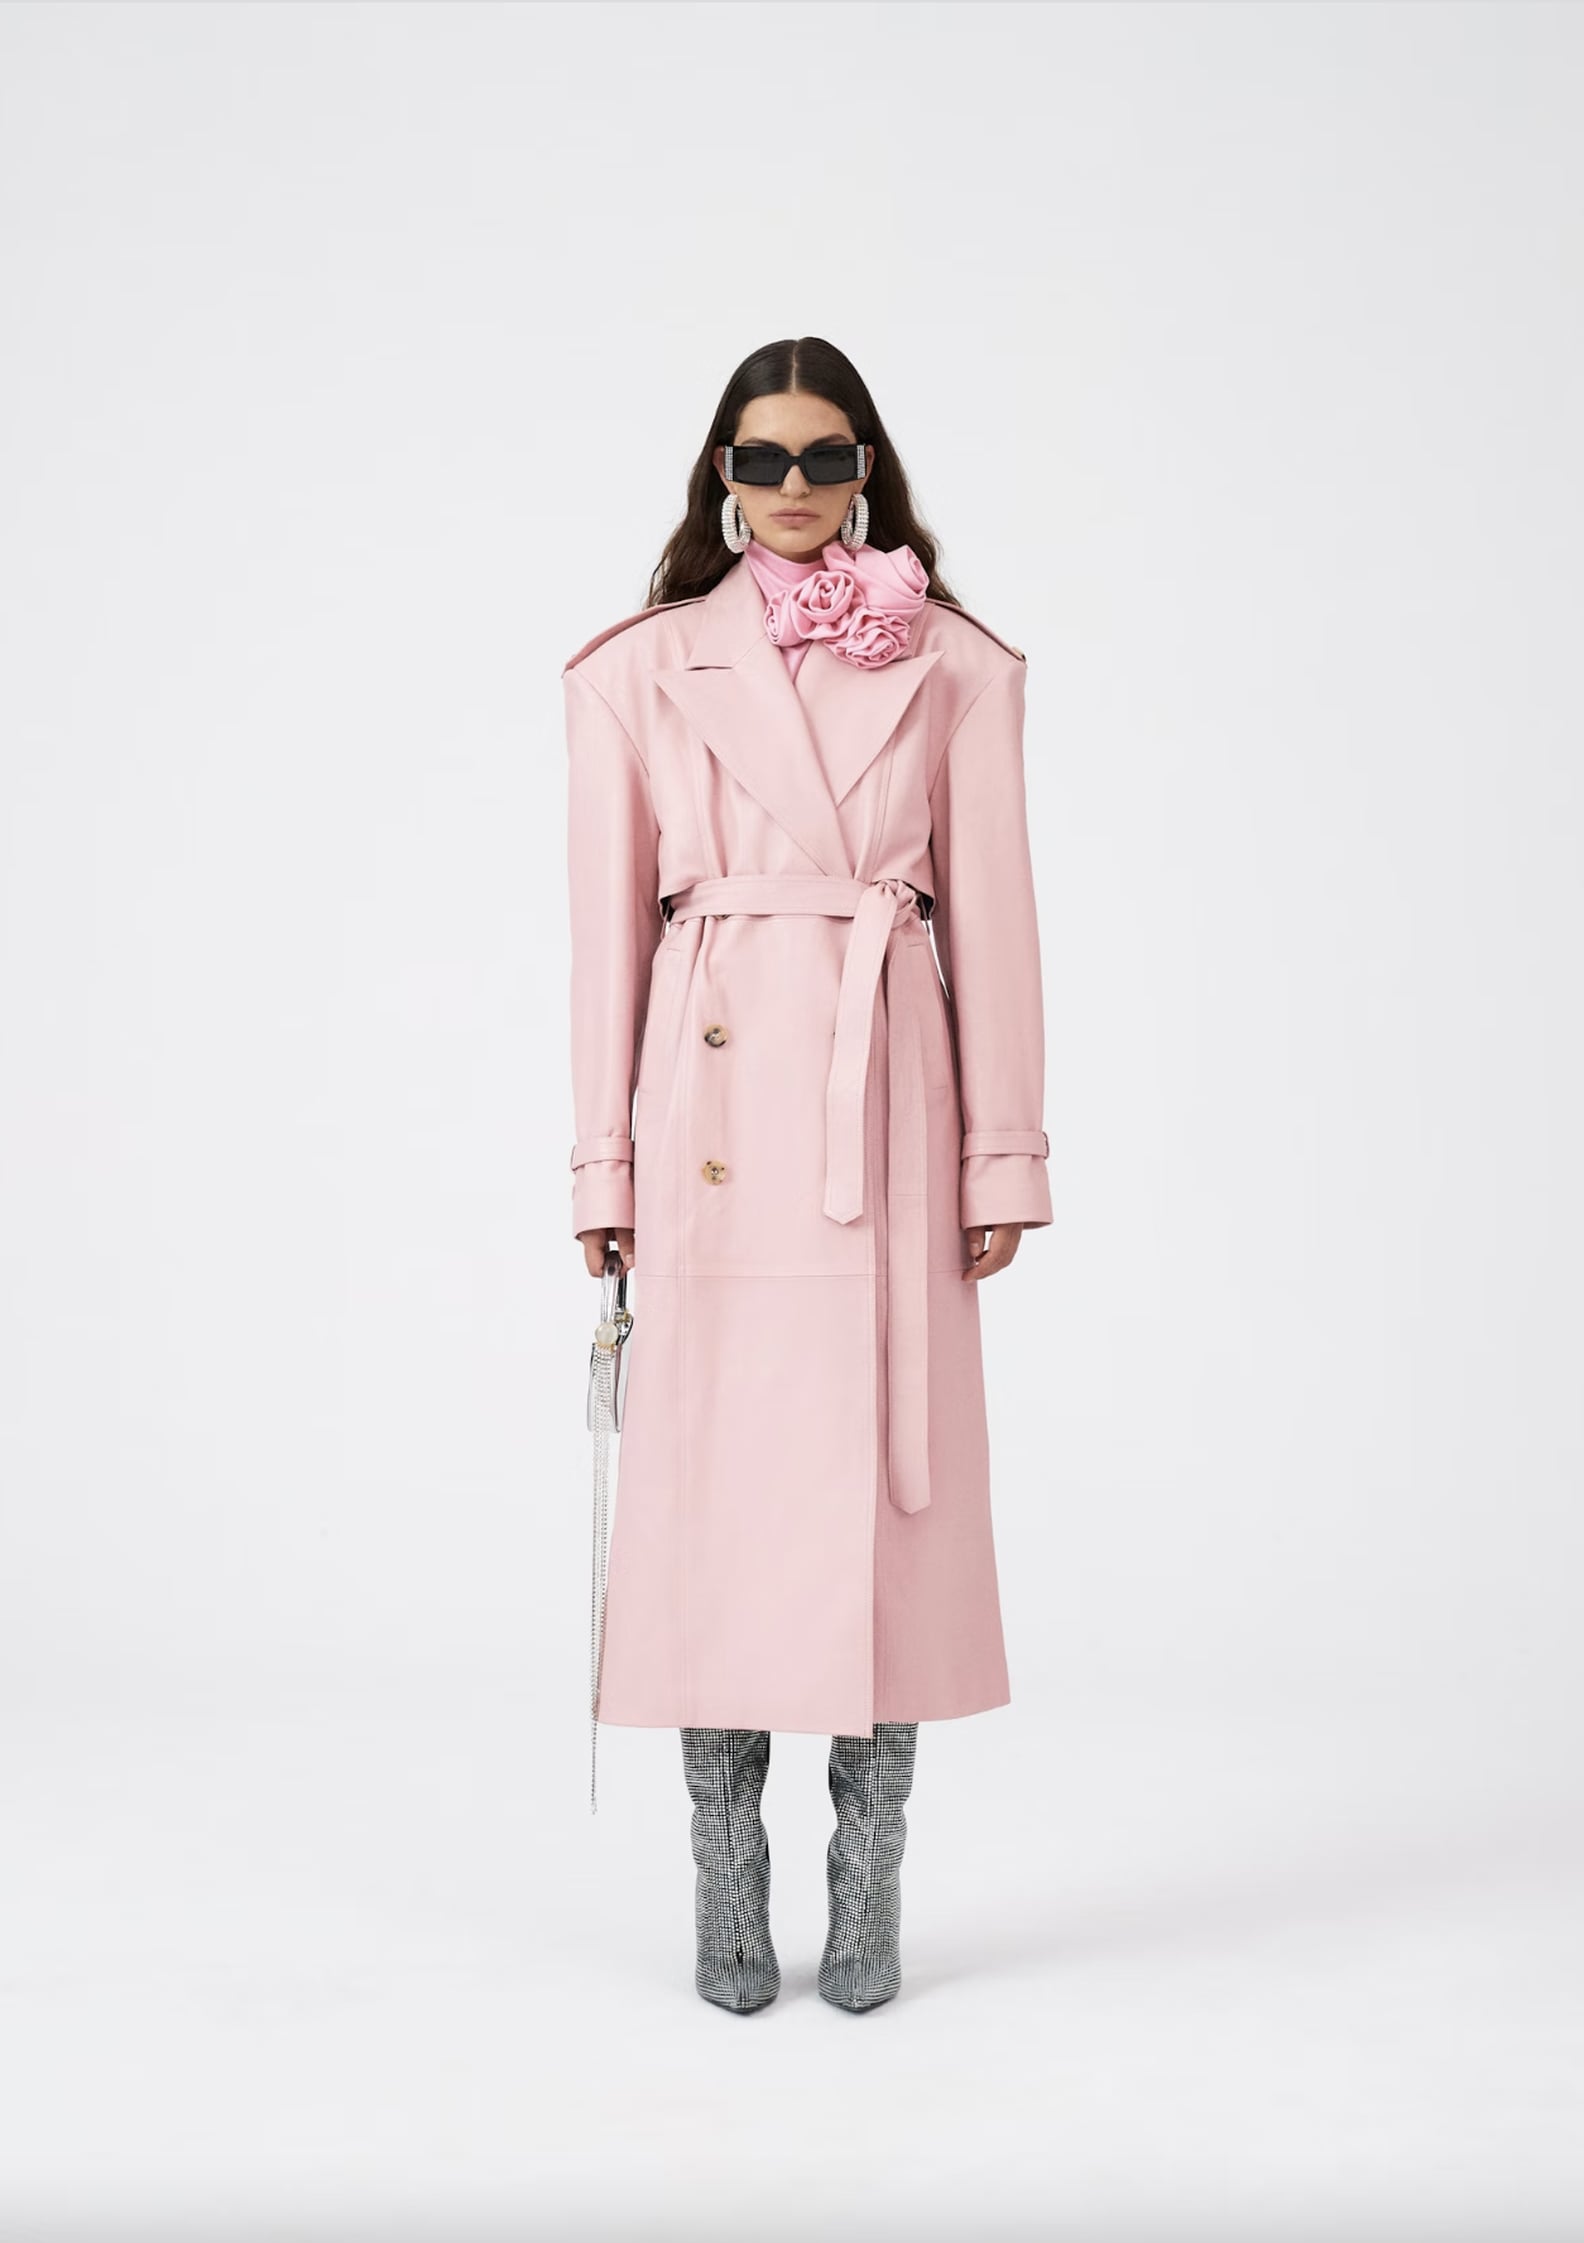 J Lo Wears Pink Magda Butrym Dress and Leather Trench Coat | POPSUGAR ...